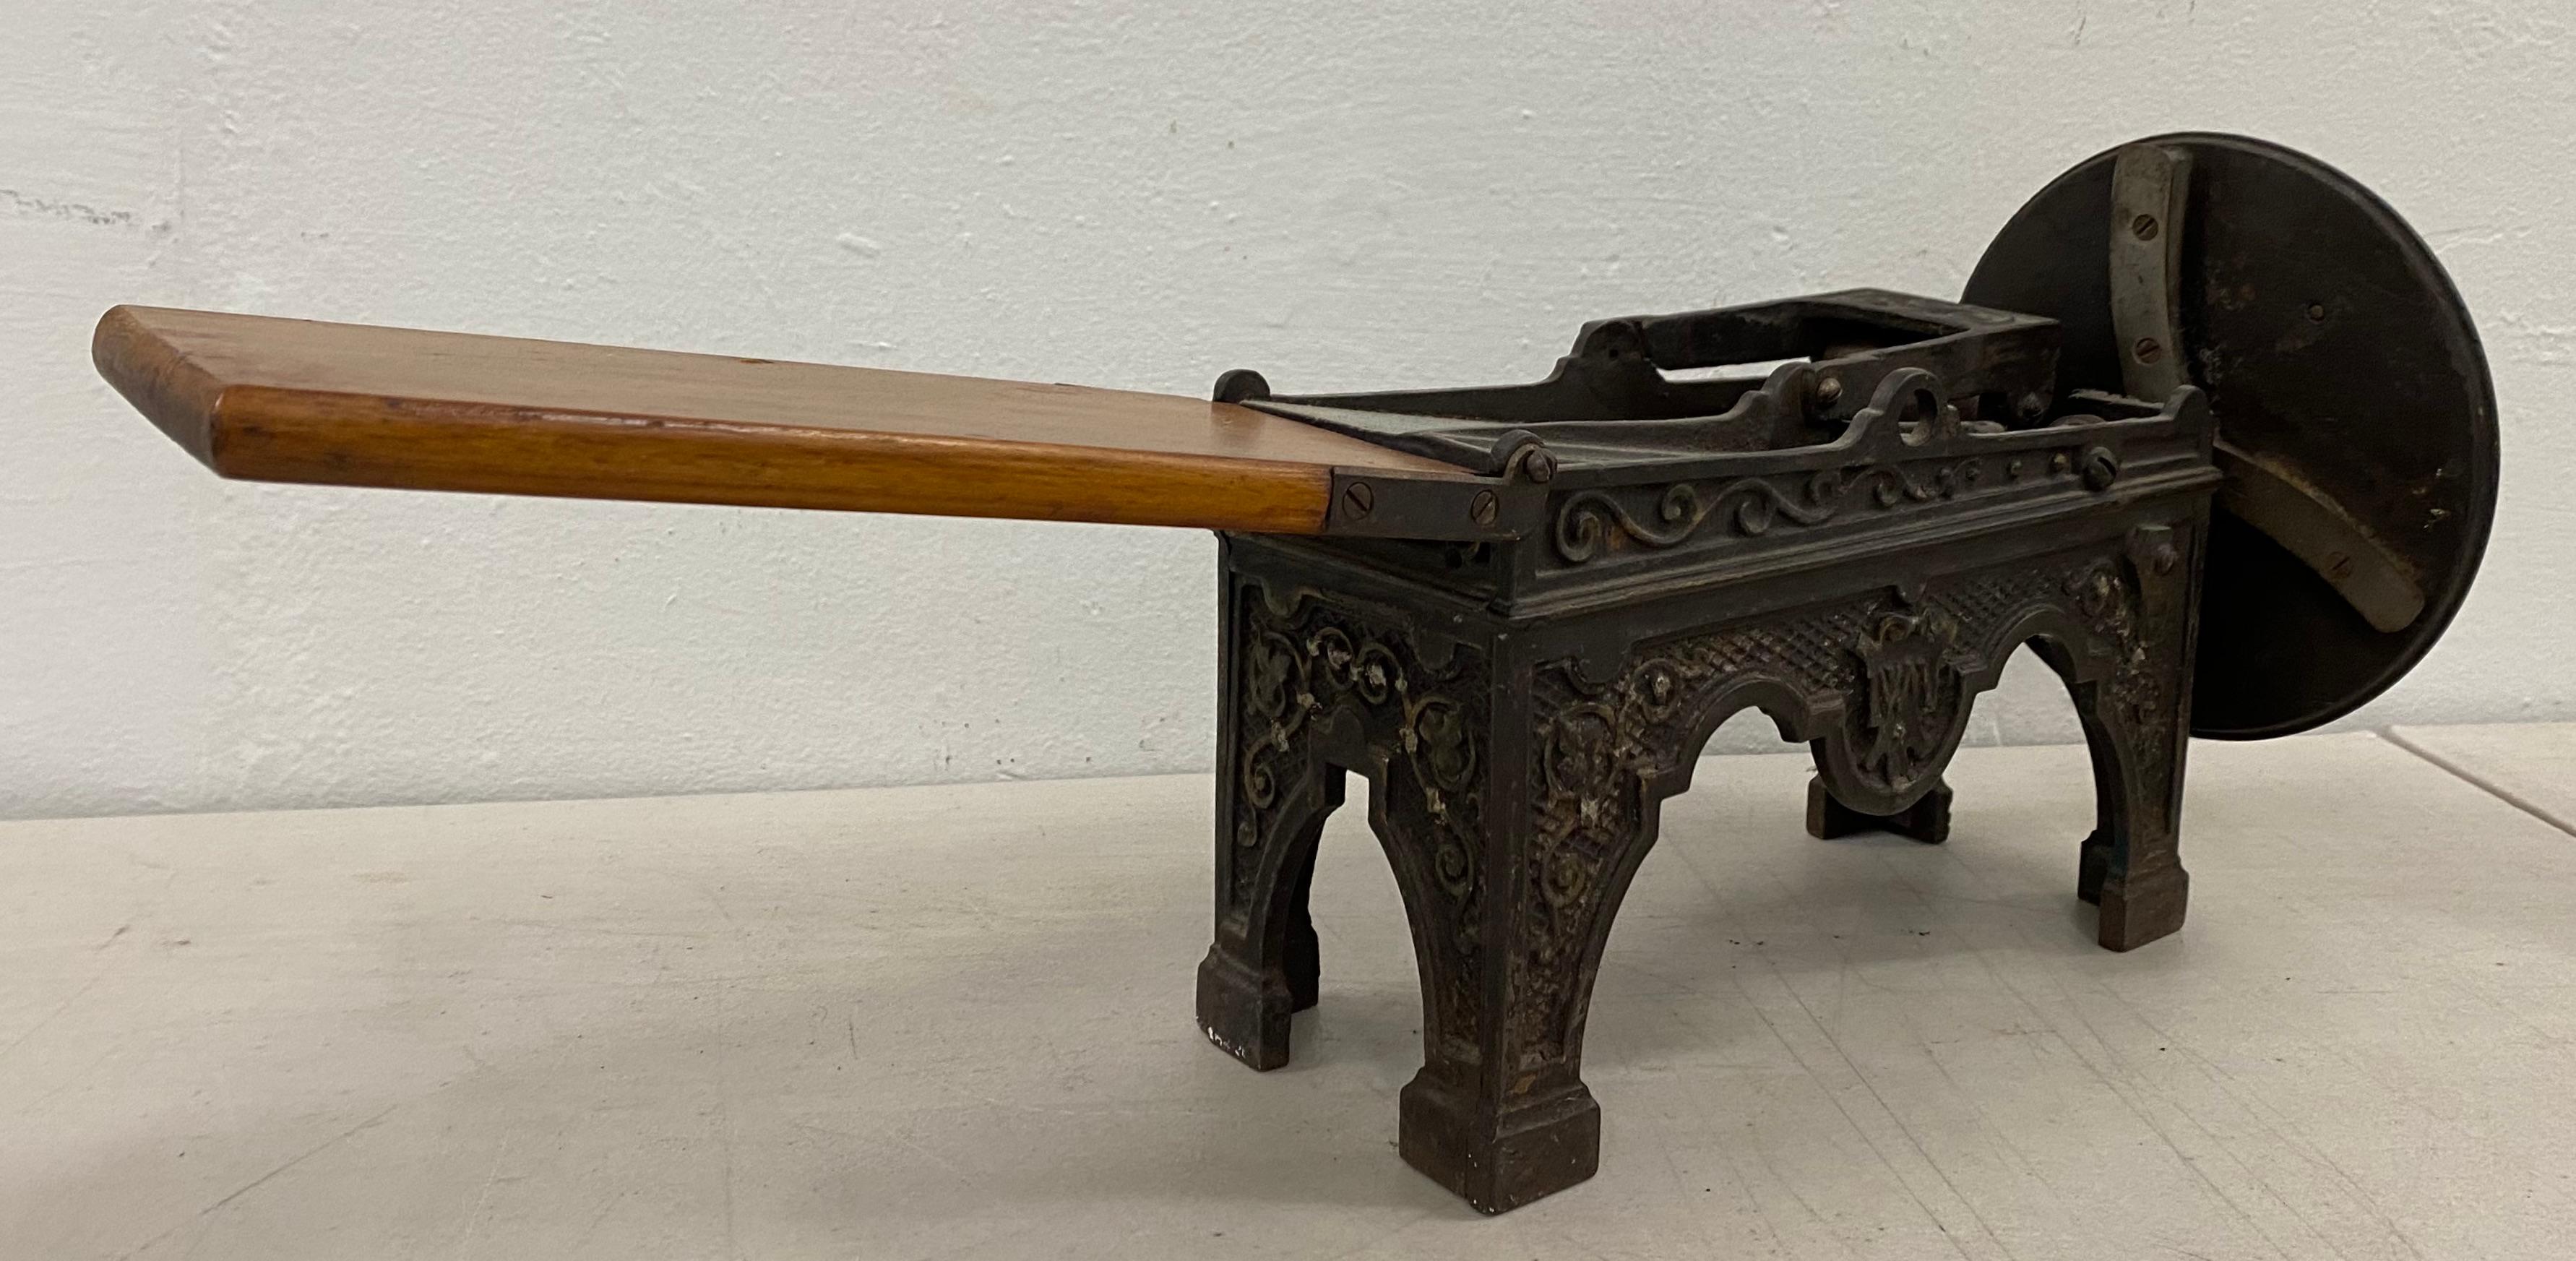 19th century cast iron & maple tobacco cutter / shredder

Once used for cutting and shredding tobacco. Today it can be used for decorative purposes.

Measures: 11